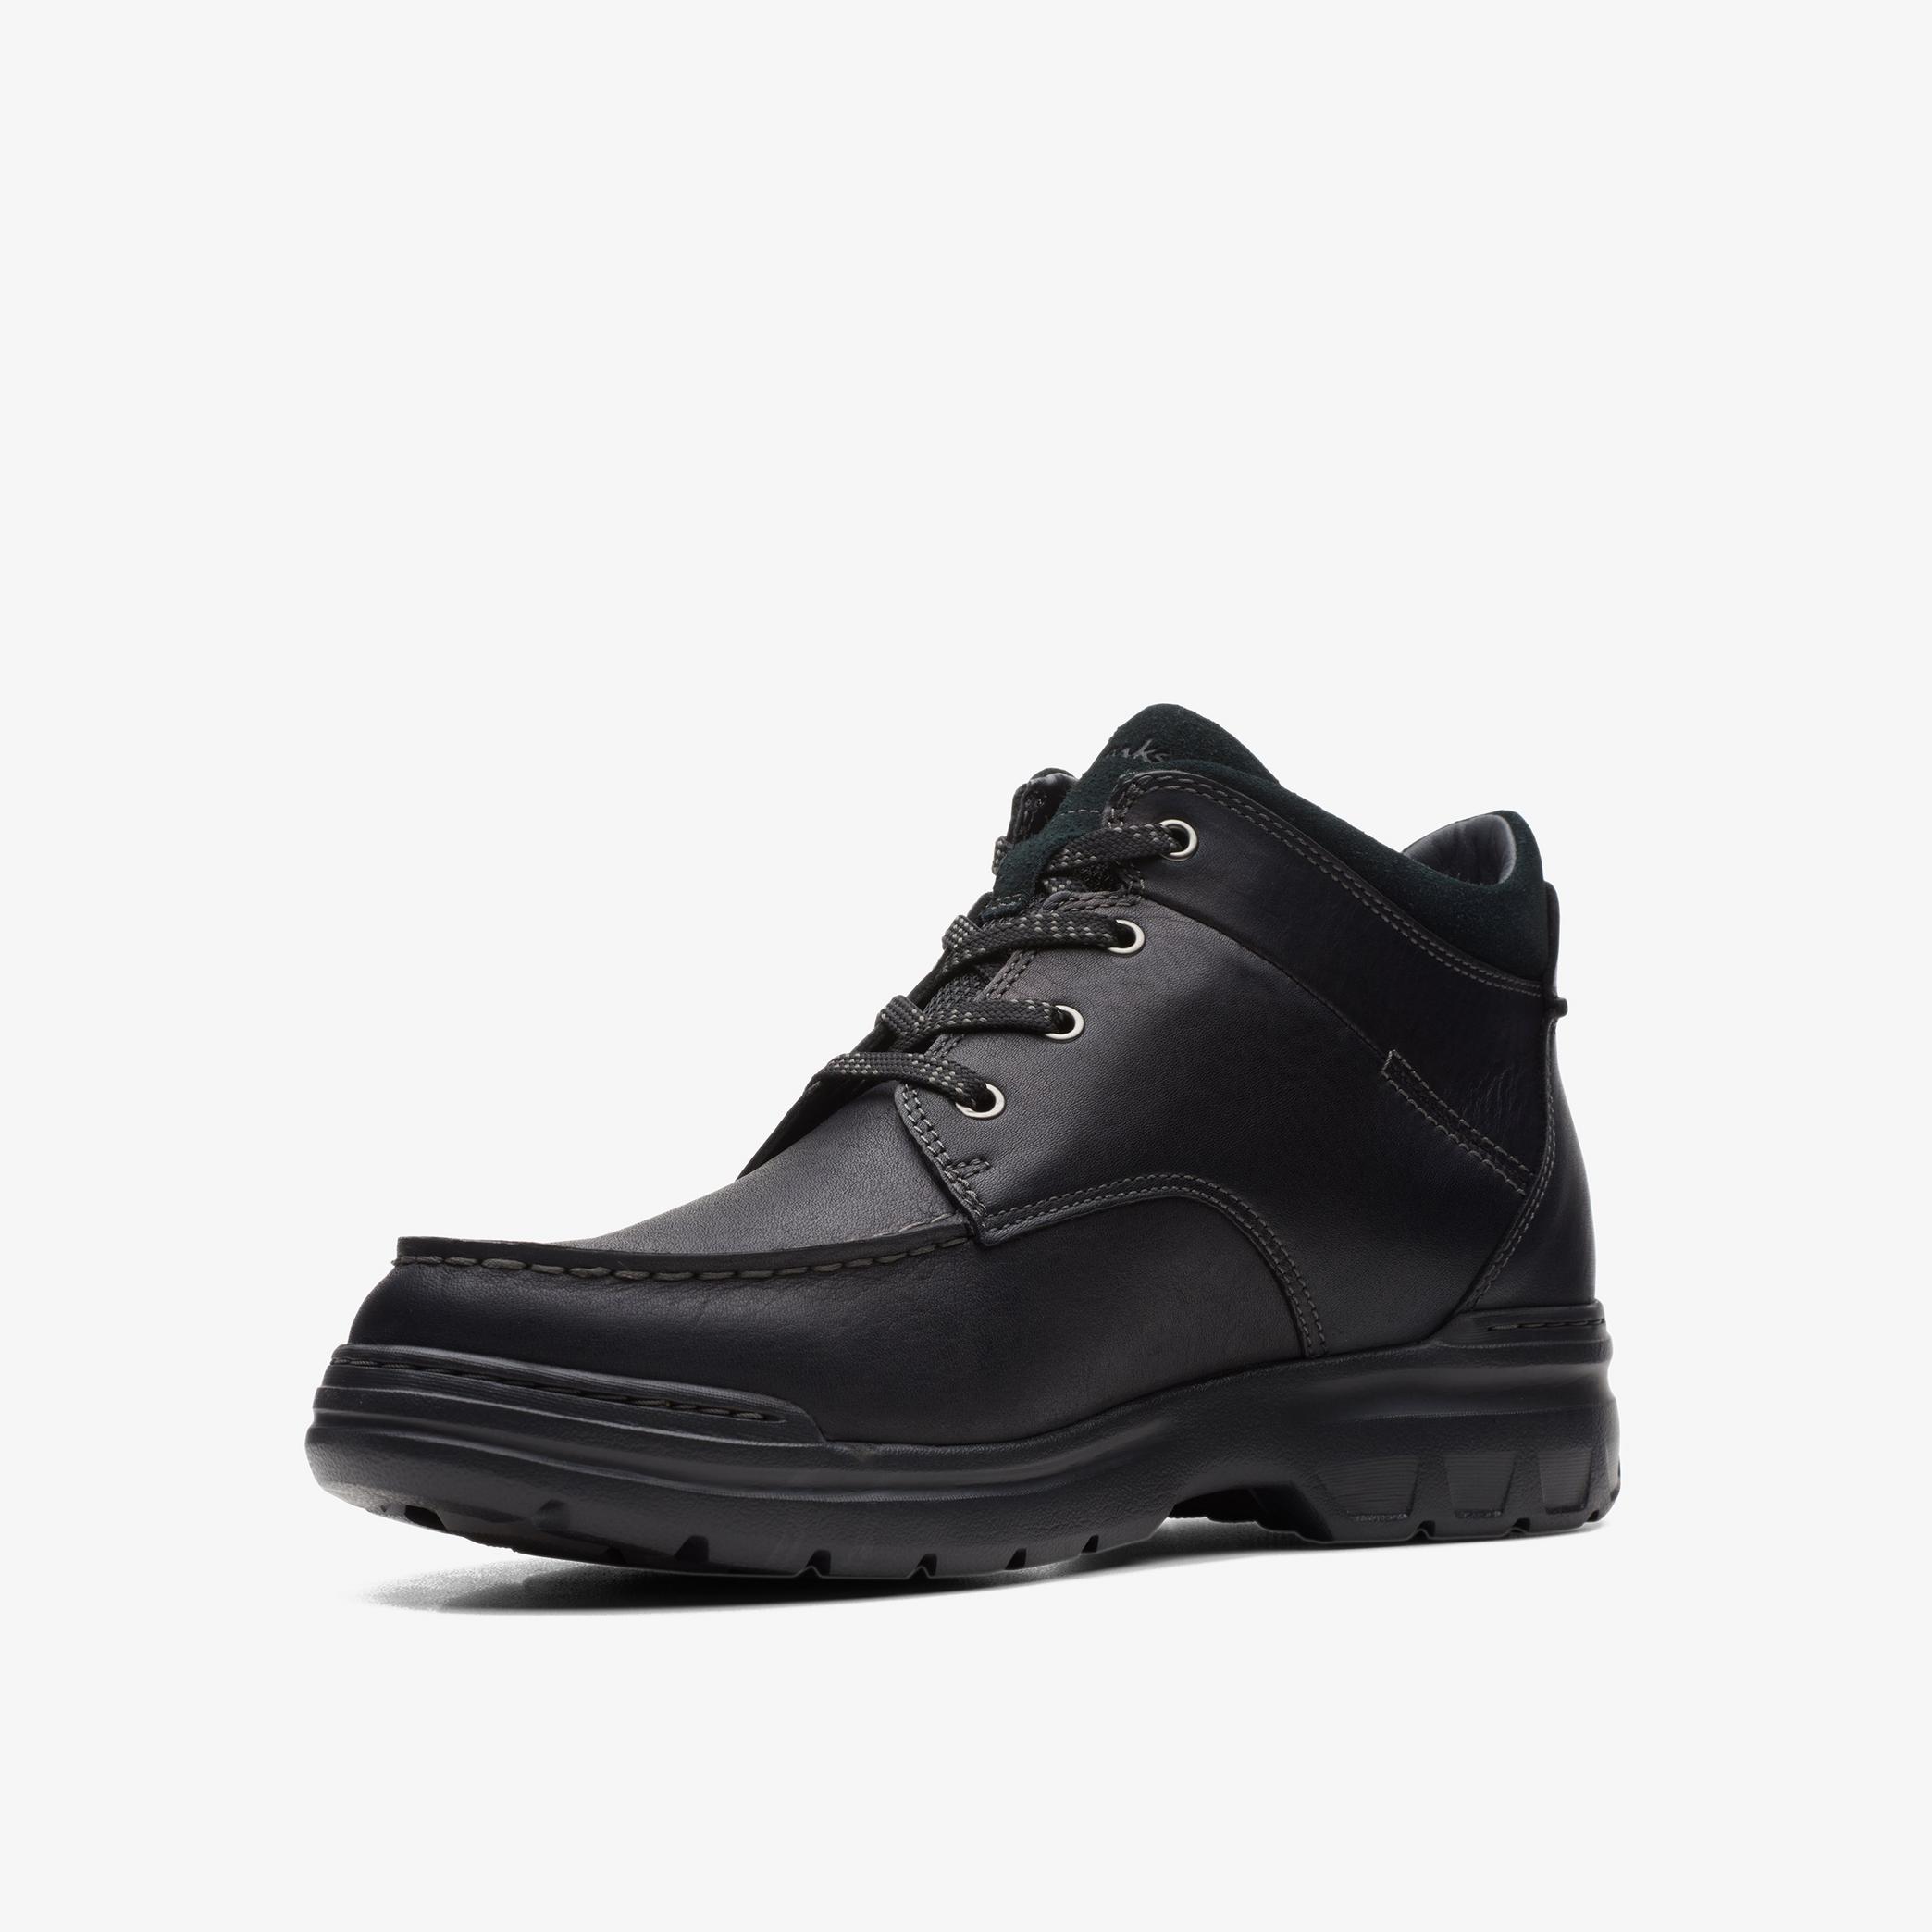 Rockie2 Hi GTX Black Leather Ankle Boots, view 4 of 6